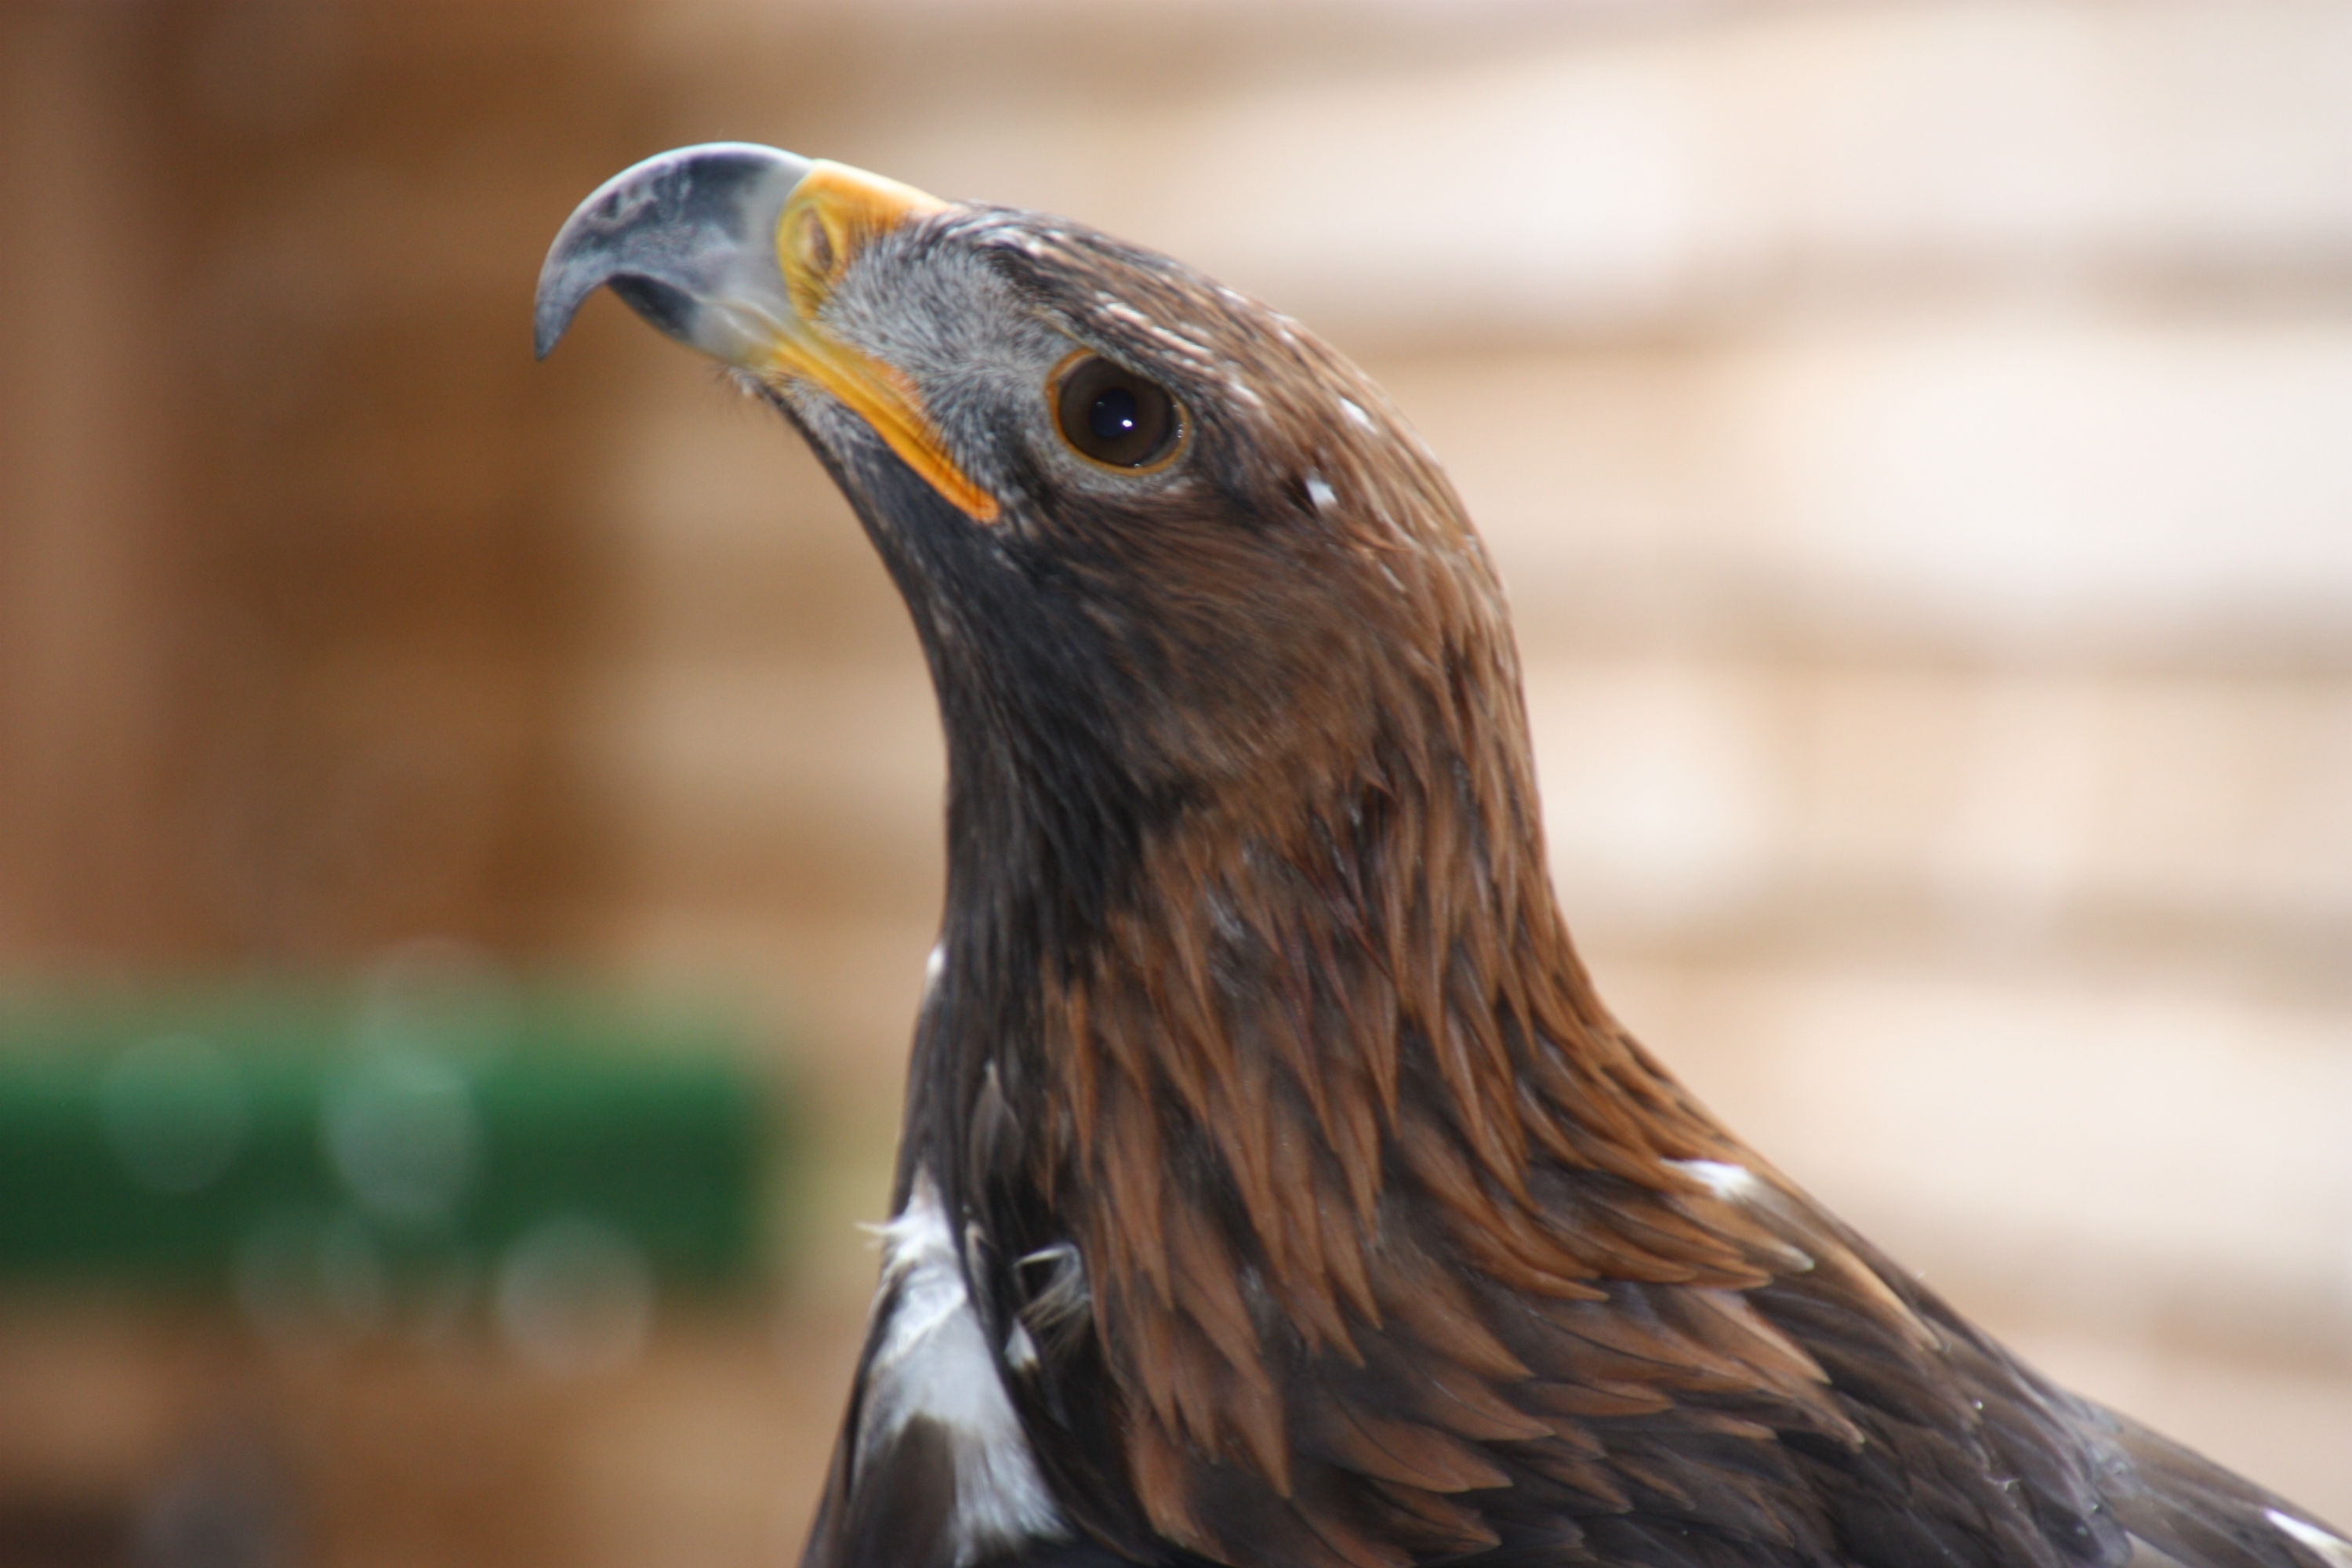 Golden eagle rescued from squalid kitchen